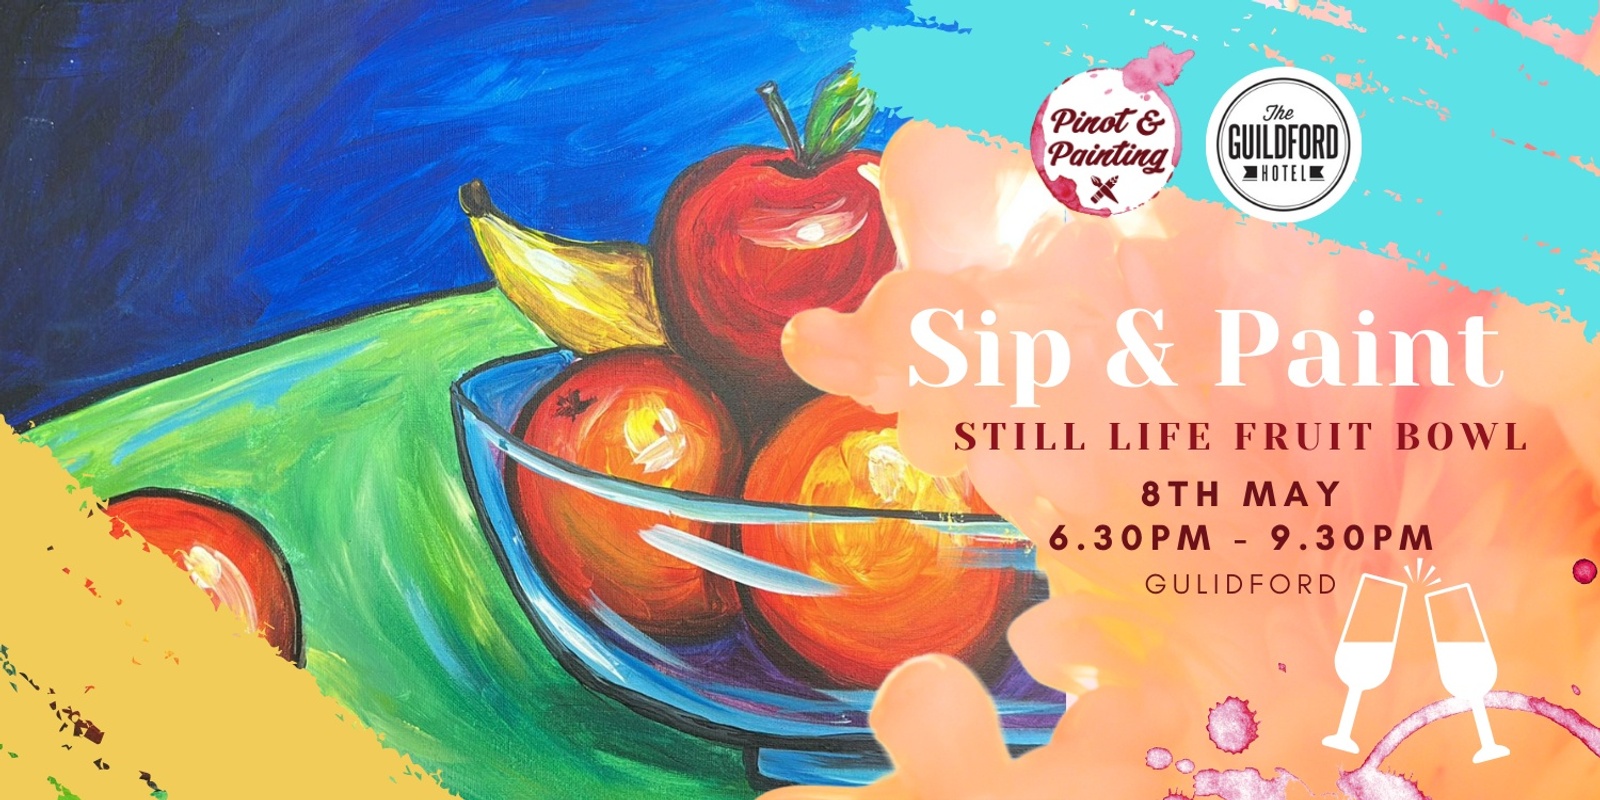 Banner image for Still Life Fruit Bowl - Sip & Paint @ The Guildford Hotel